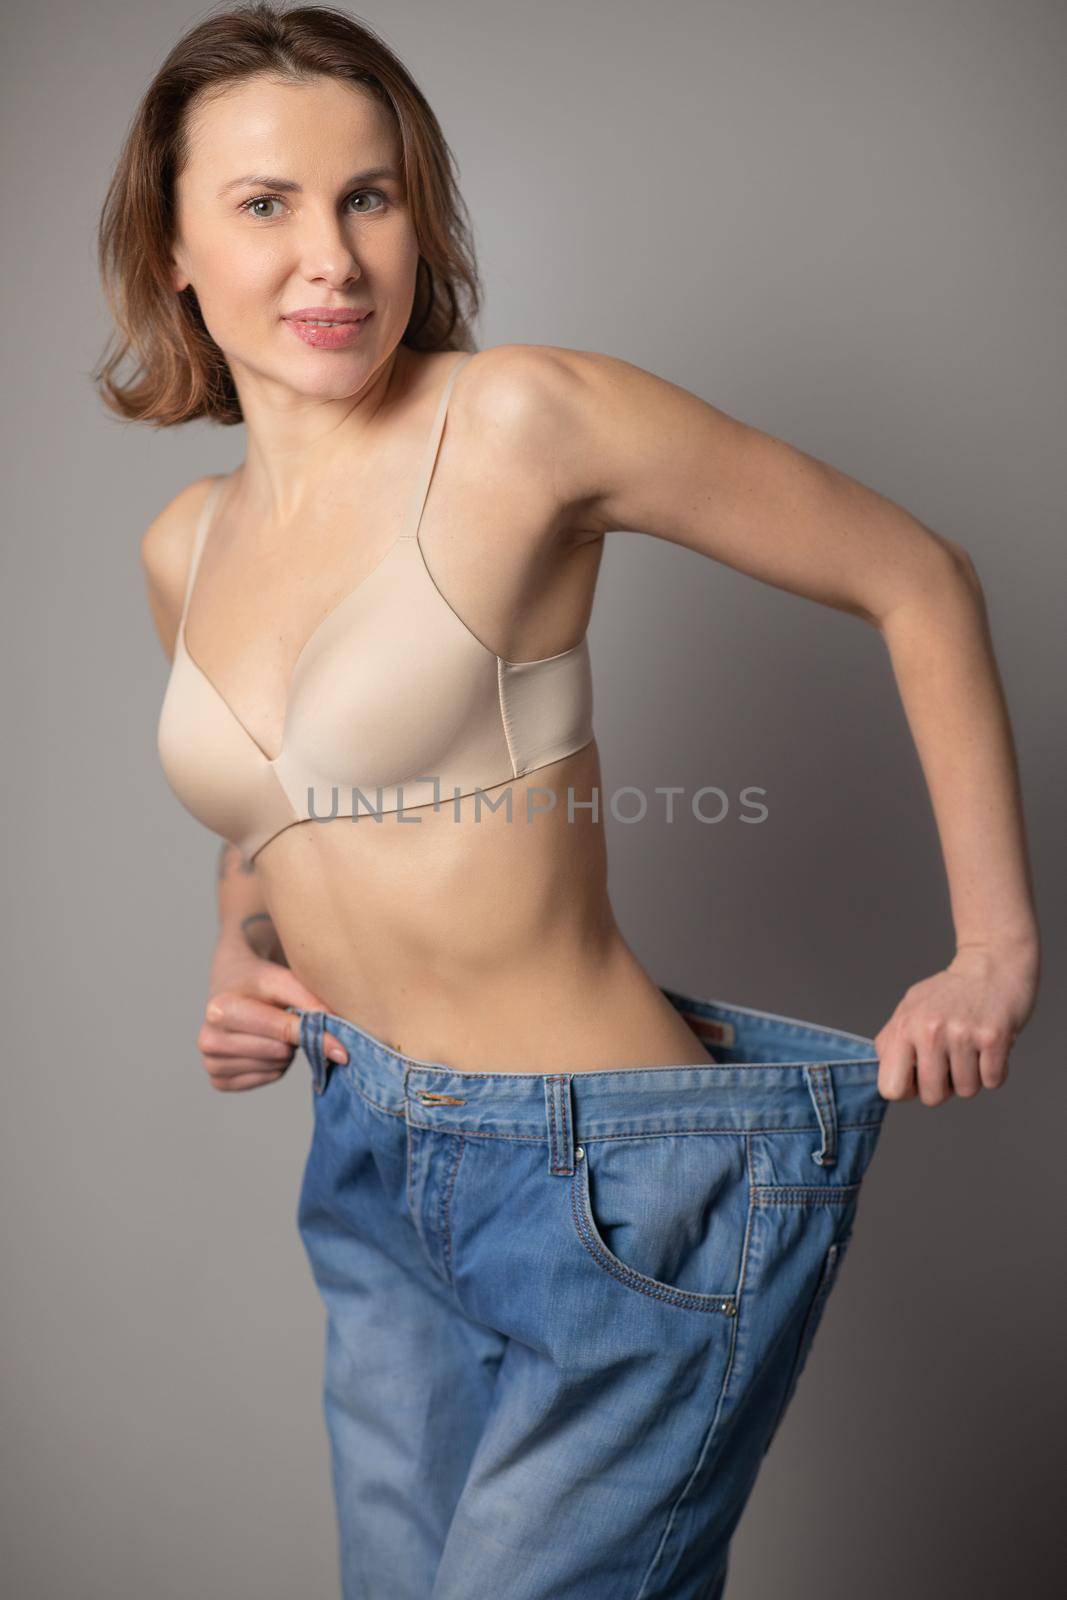 Woman Losing Weight After Diet, Slim Down, Burning Fat and Flat Waist. Thin Girl Show Weight Loss and Old Big Jeans. Skinny Female Belly Wearing Too Large Pants. Getting in Shape and Reaching the Goal